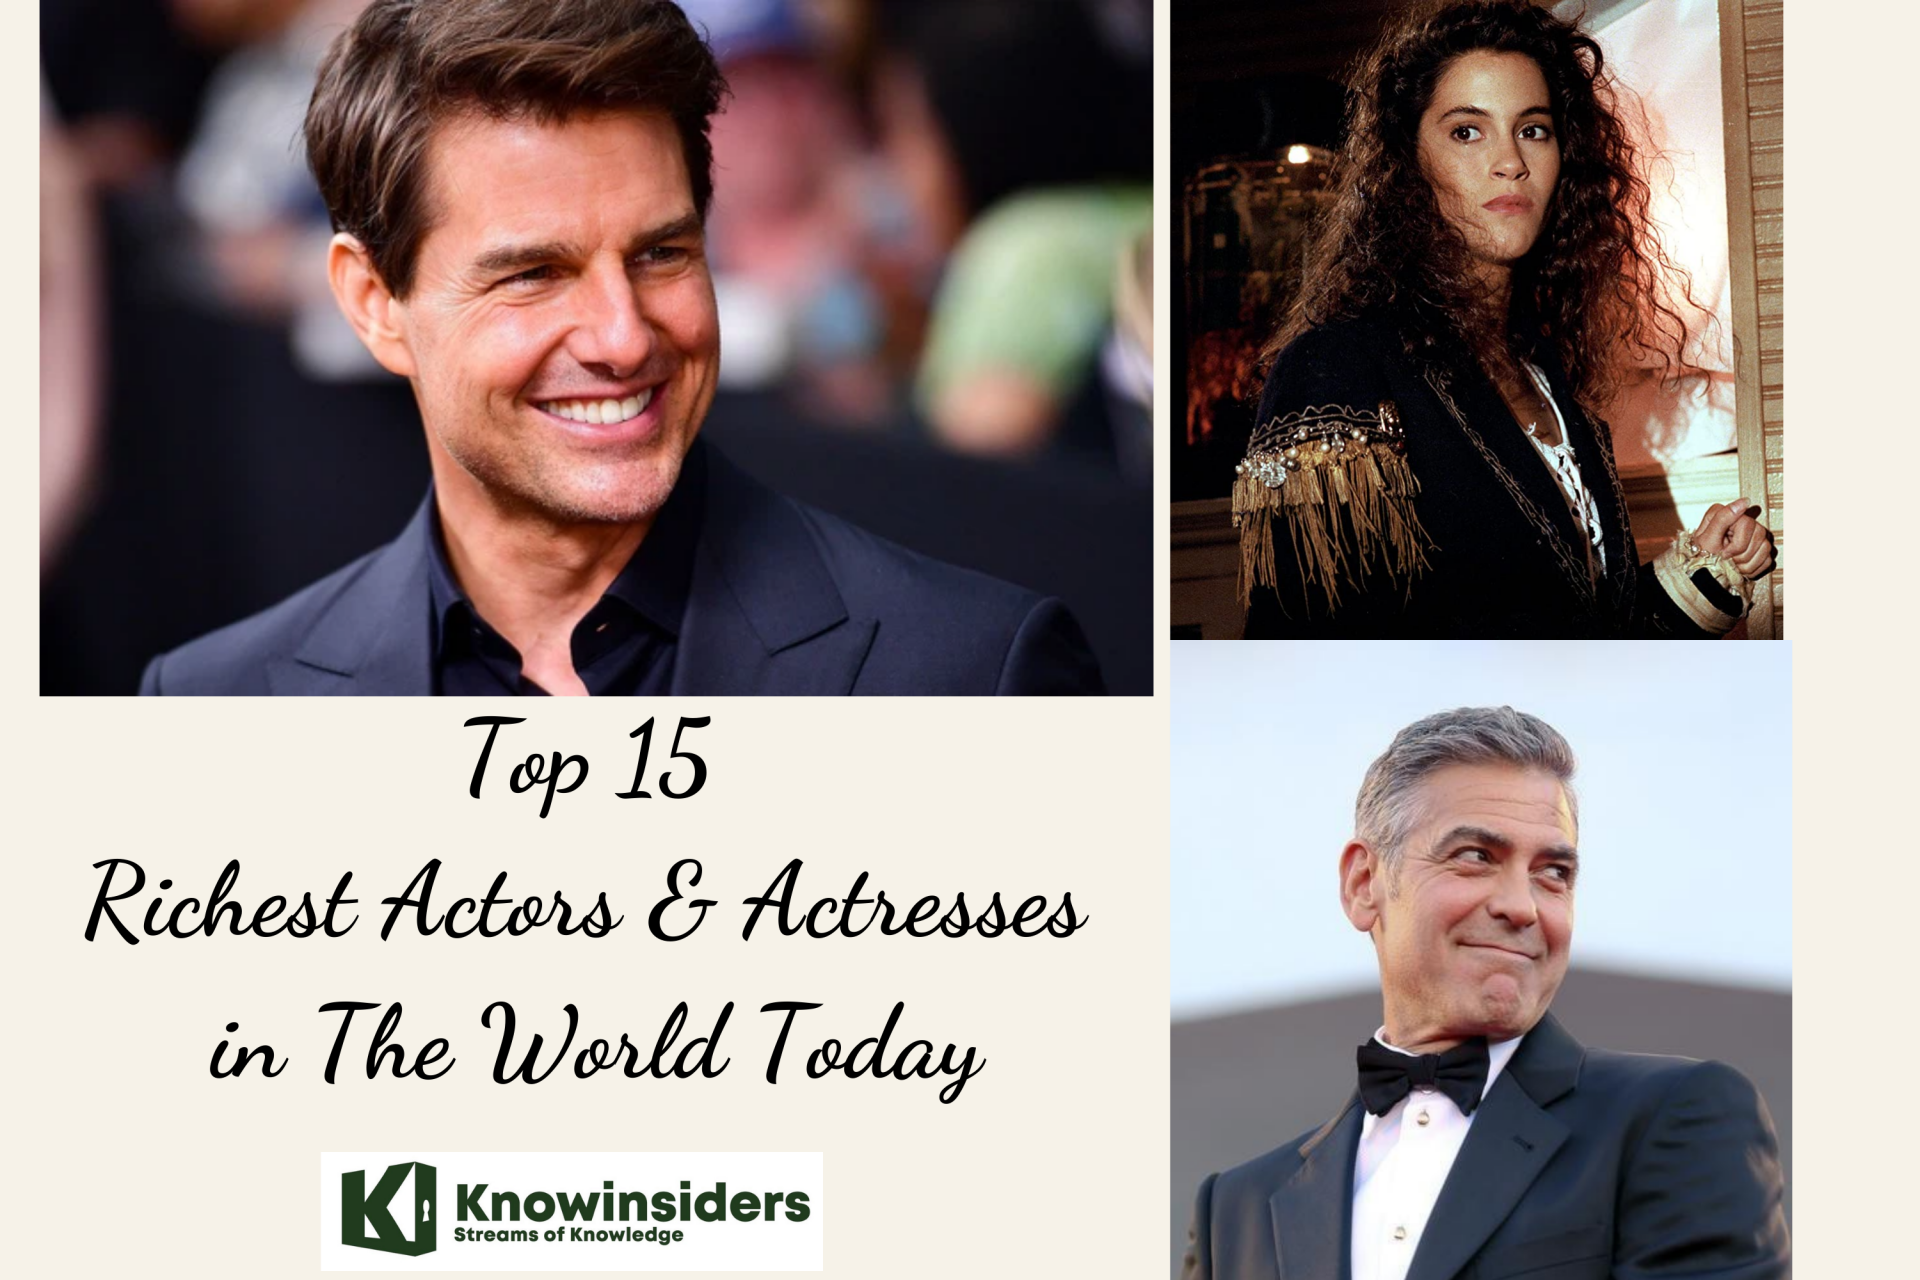 Top 15 Richest Actors & Actresses in The World for 2021/2022